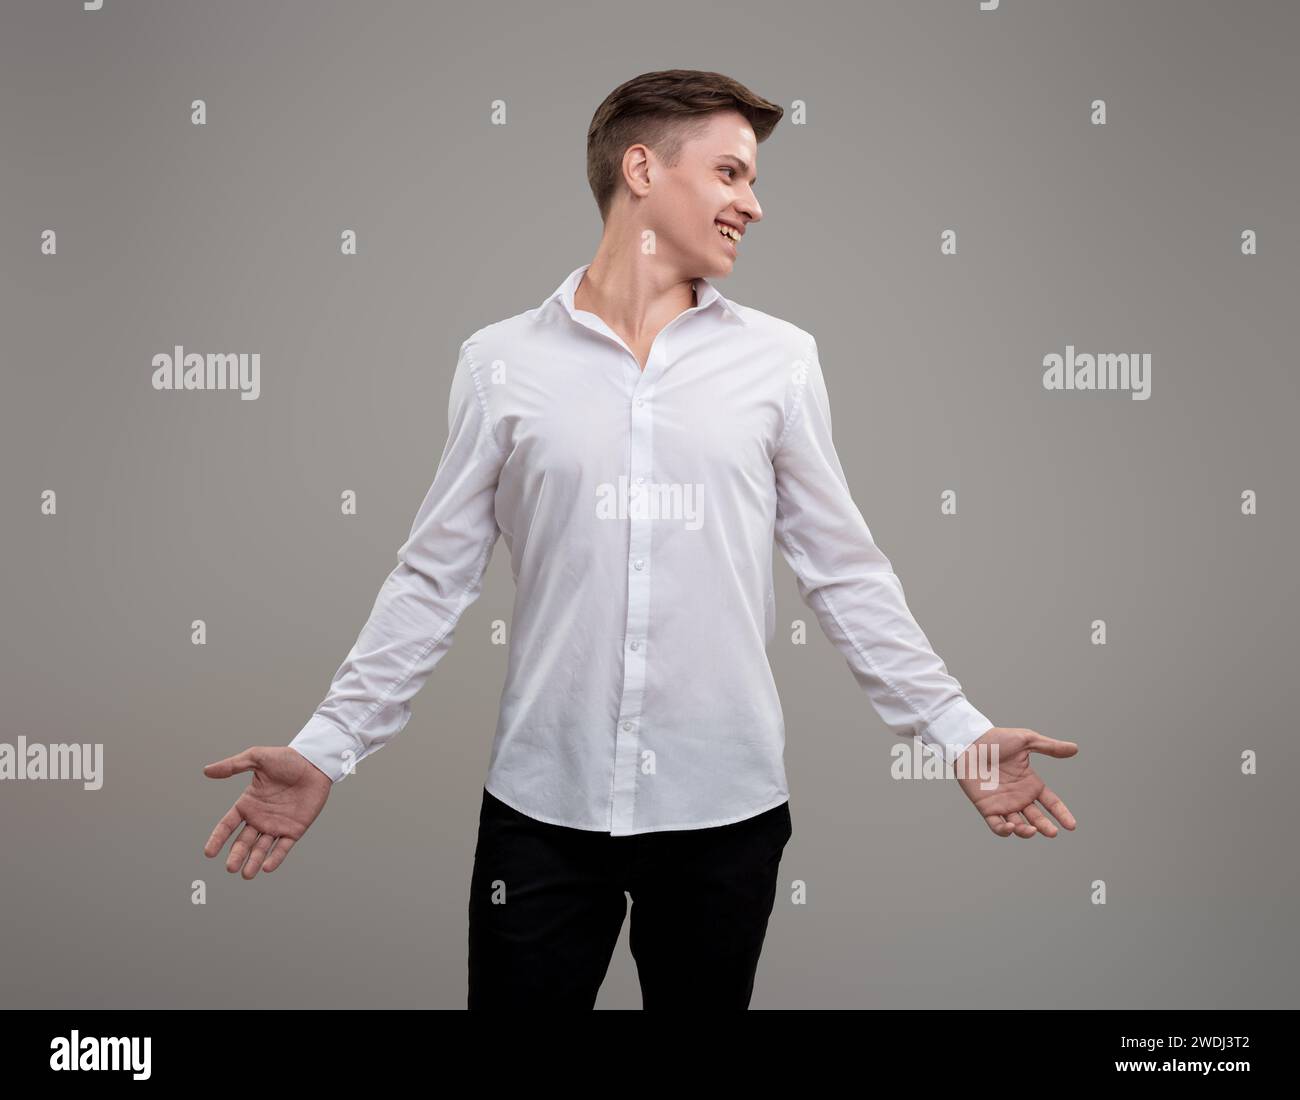 Personable man with arms outstretched presents an inviting posture, blending openness with a sharp outfit Stock Photo